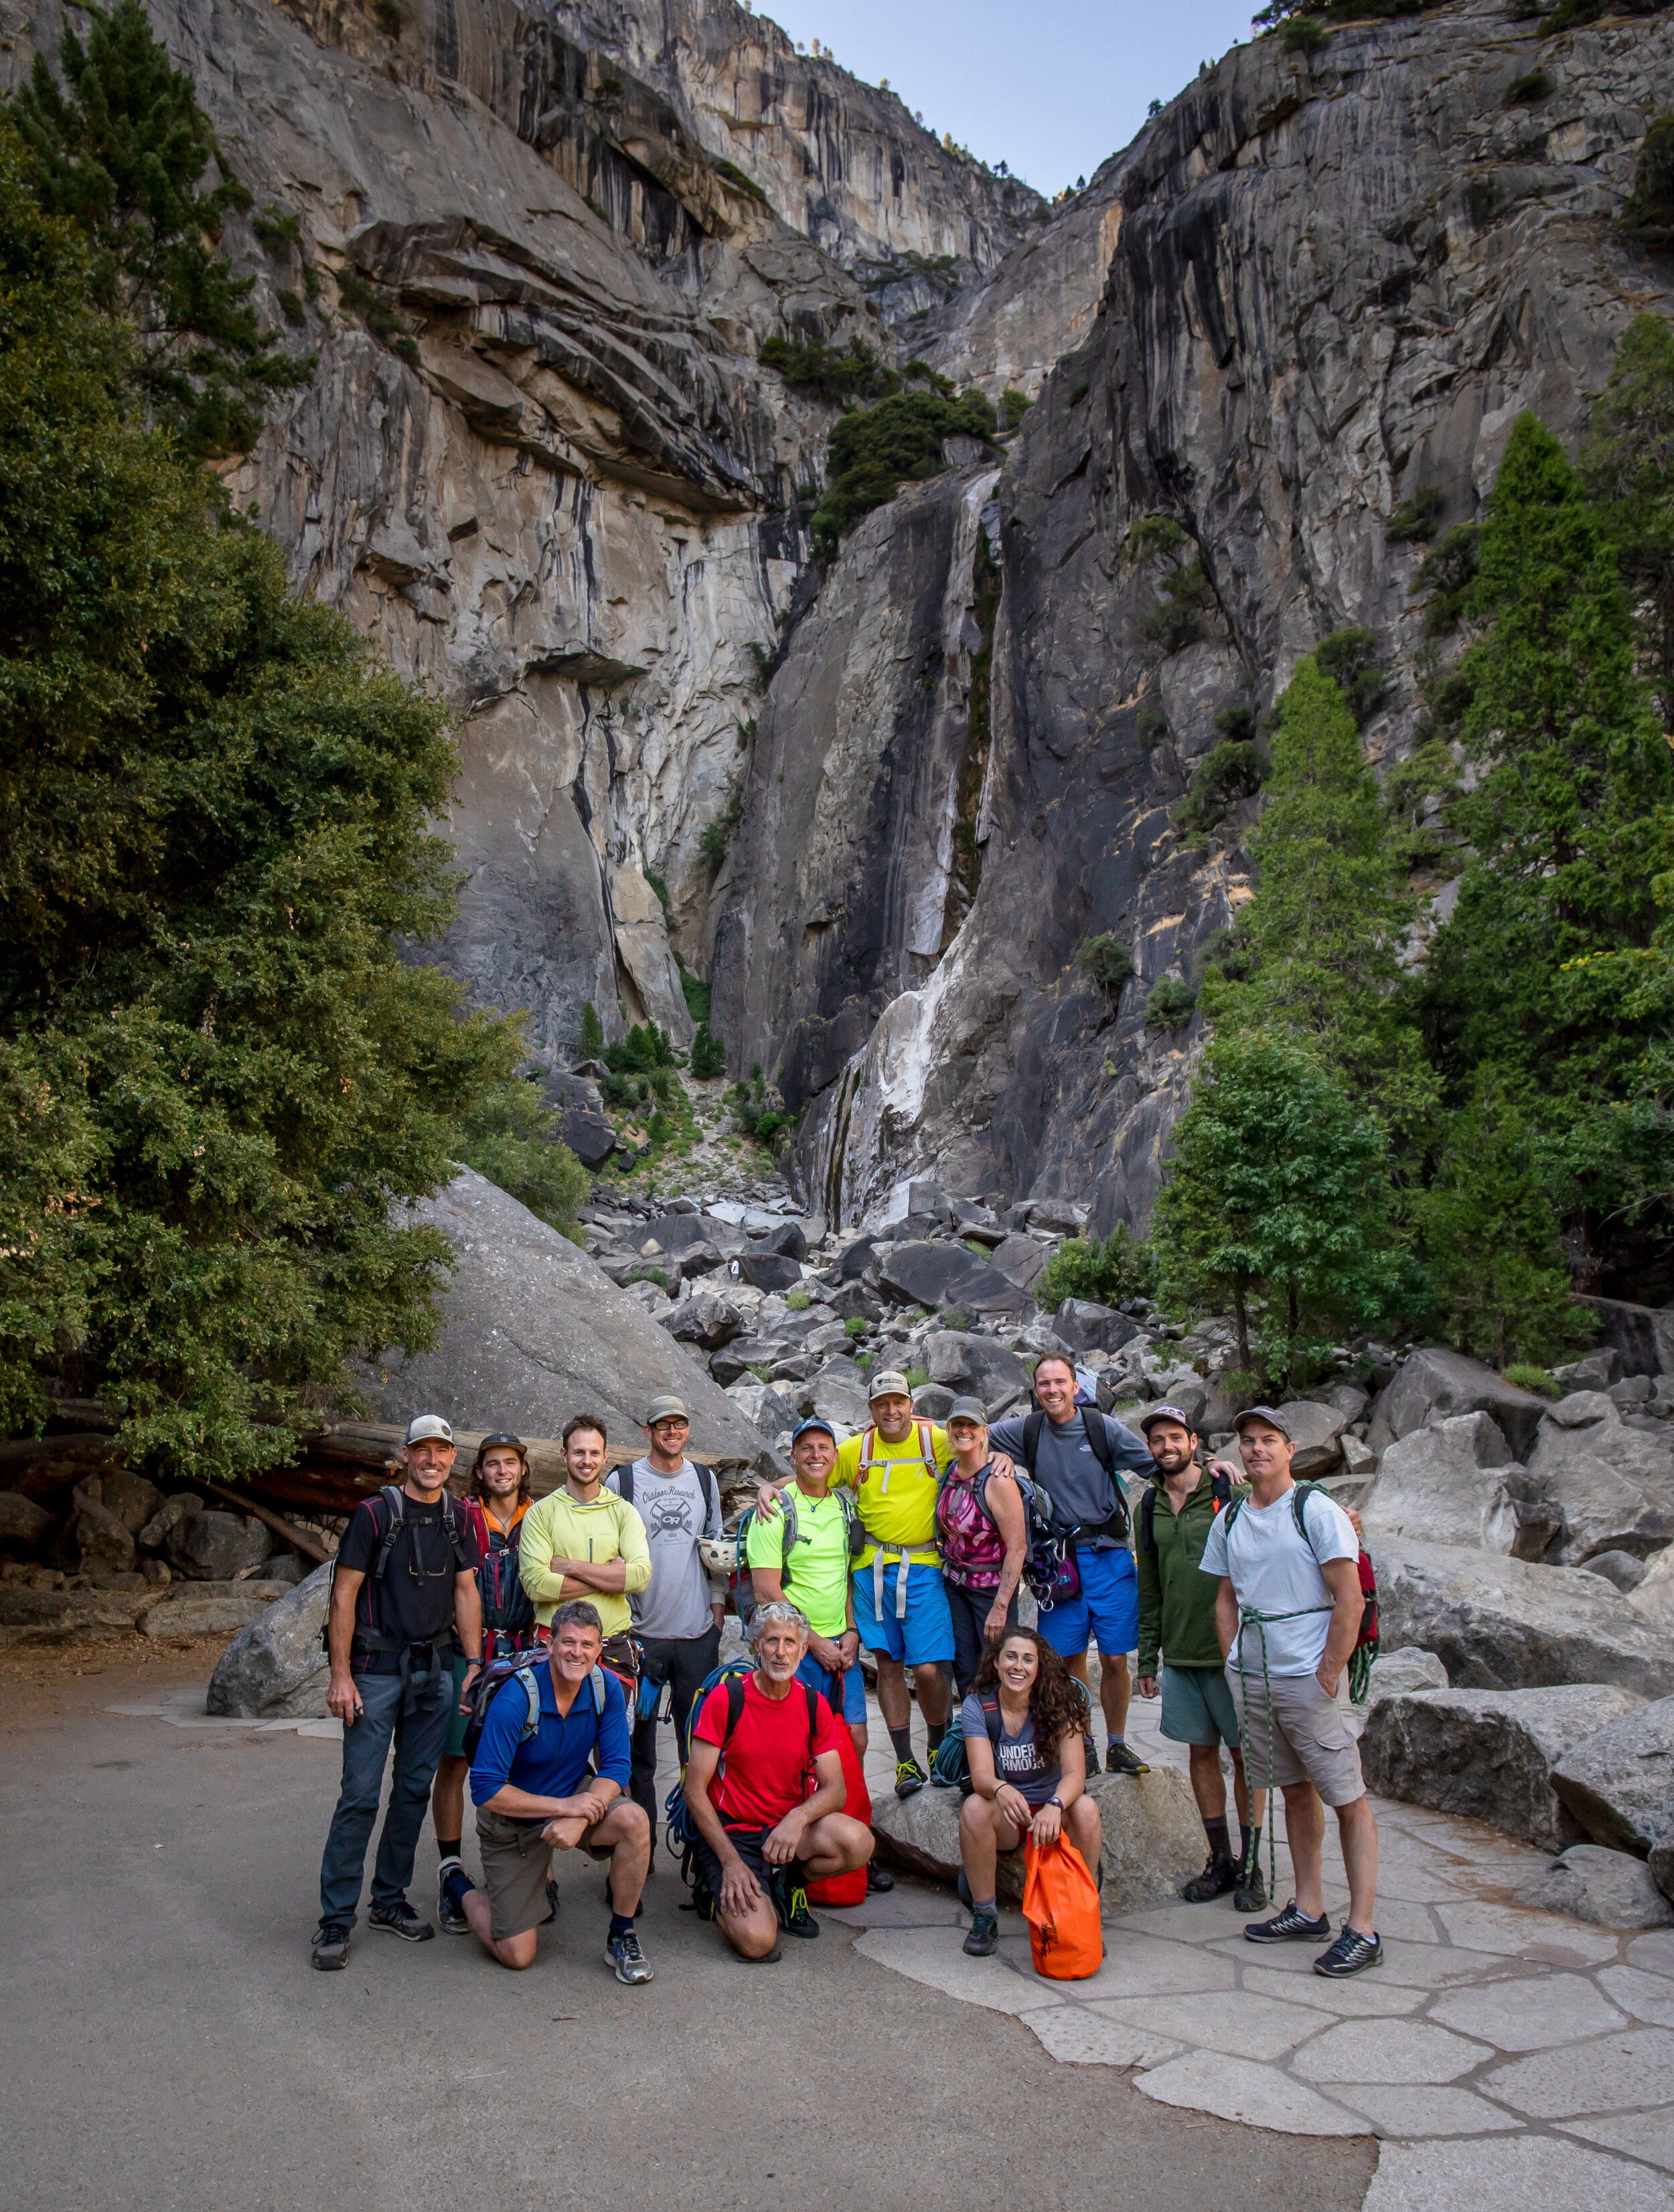  The crew at the base of Lower Yosemite Falls. 